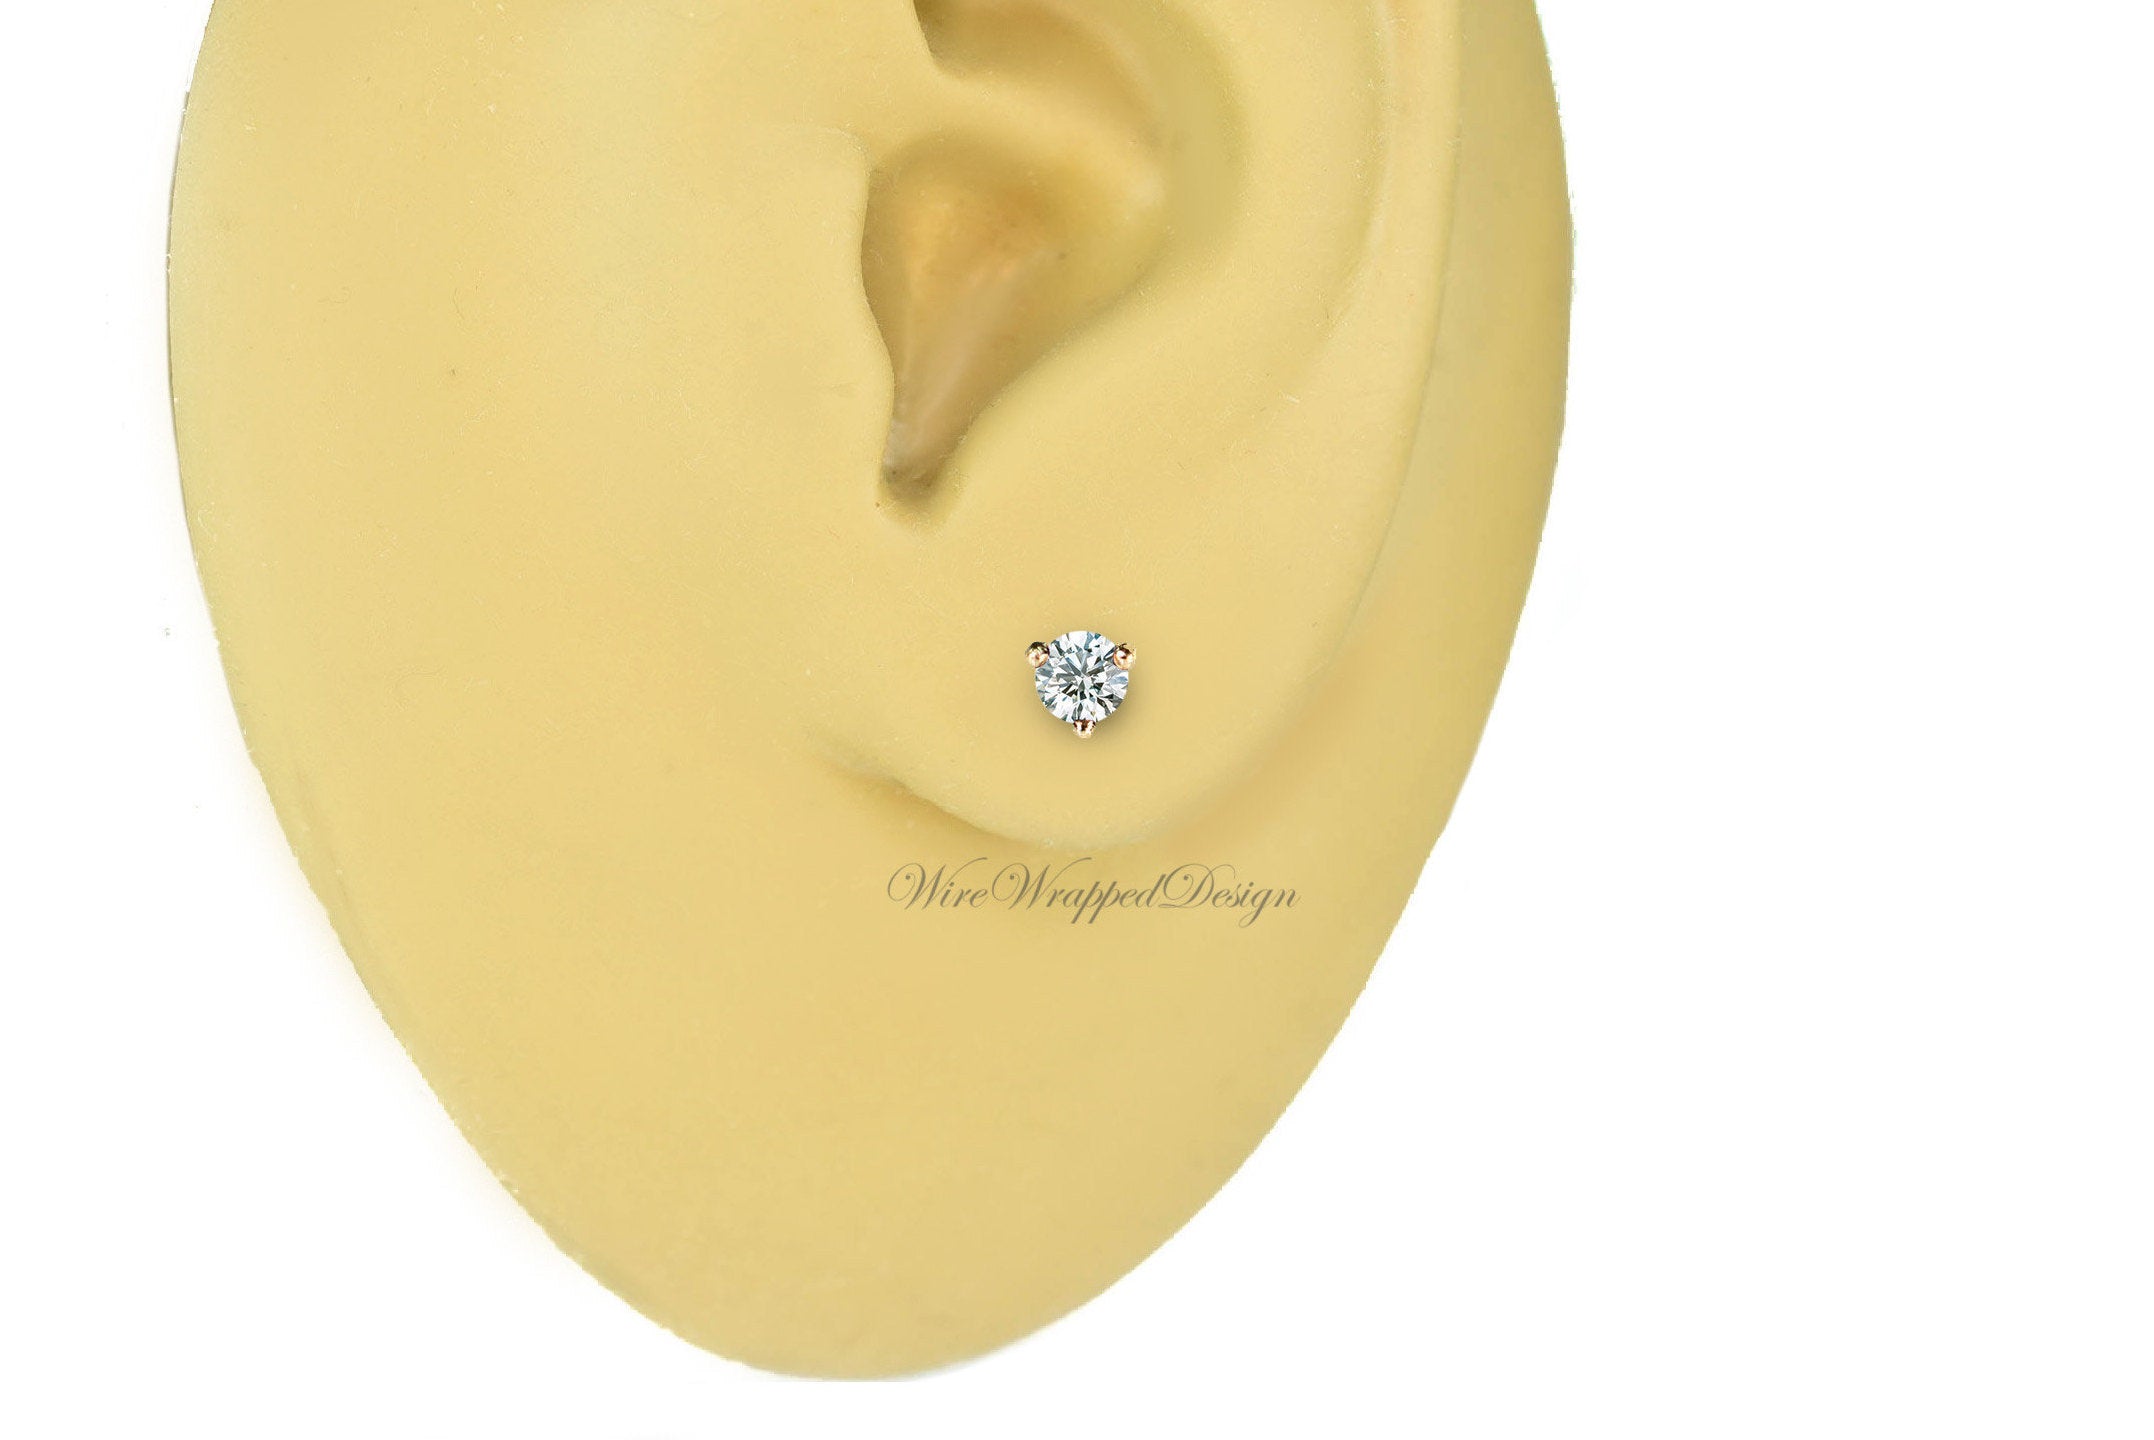 Genuine F+ VS DIAMOND Earring Studs 3mm 0.20tcw (each 0.1cts) Post w/ 14k Solid Gold (Yellow, Rose, White), Silver, Platinum Lobe Cartilage

